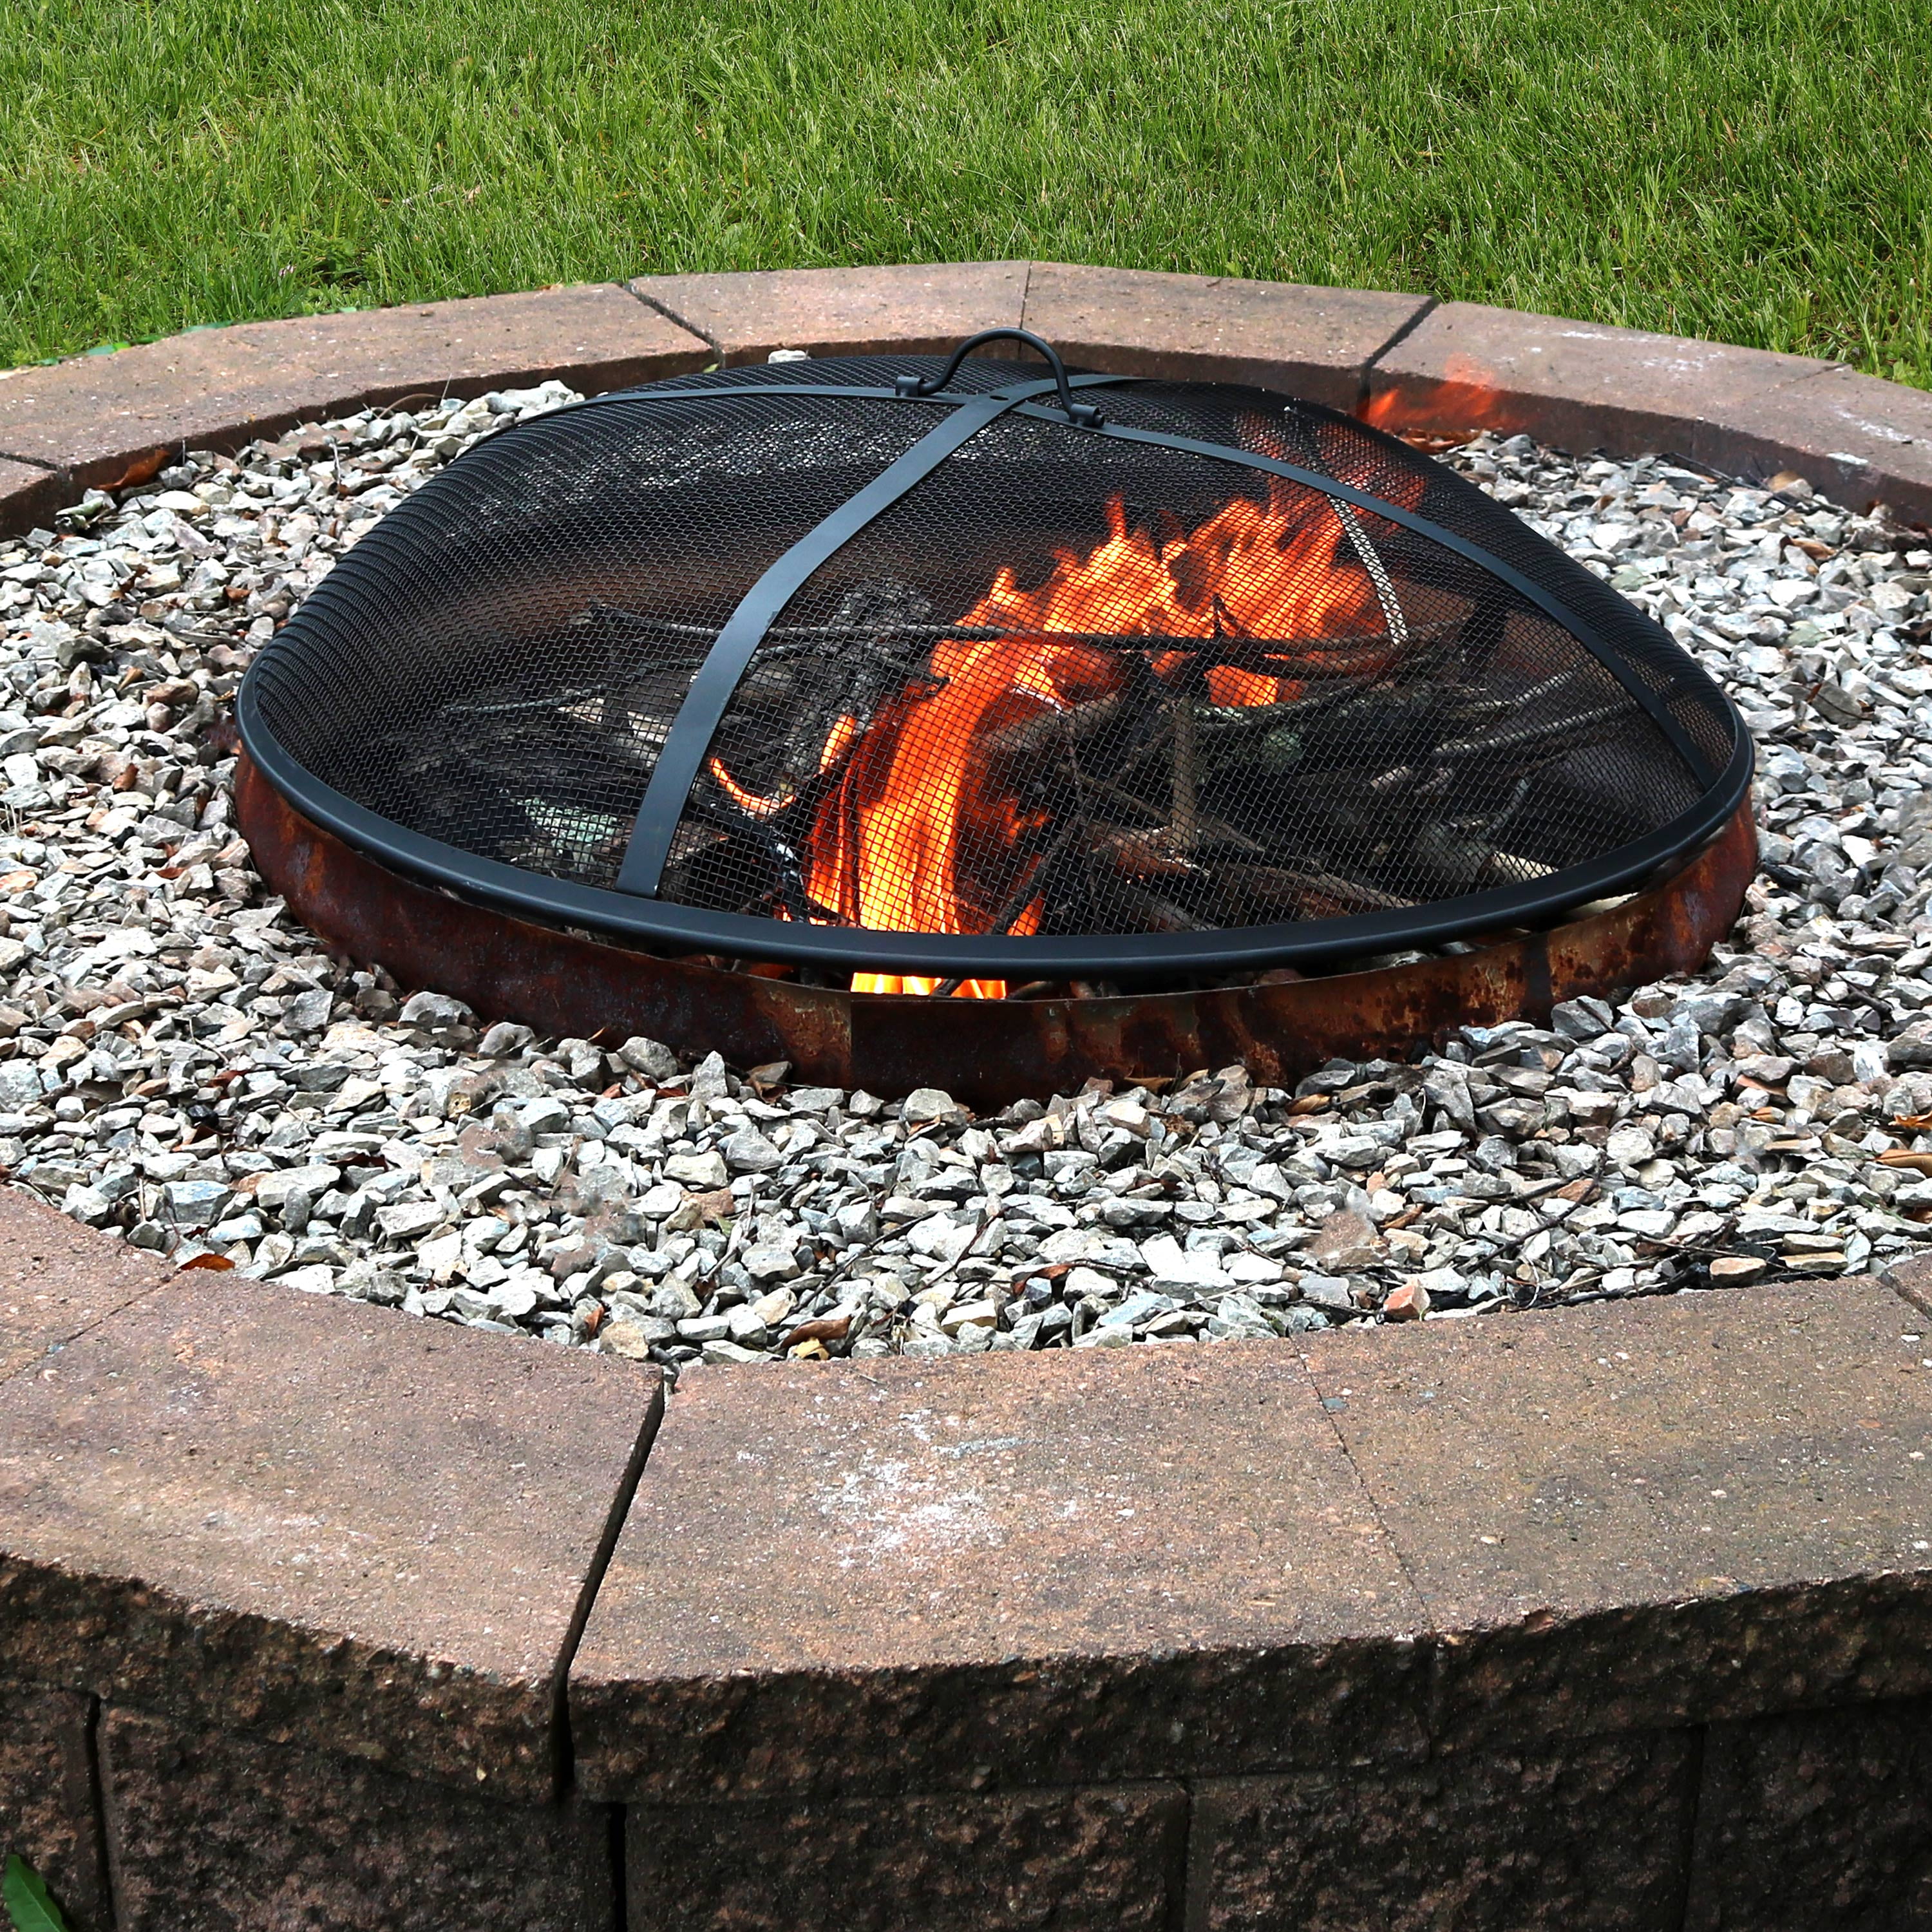 Replacement Bowl For Fire Pit, Fire Pit Bowl Insert Replacement